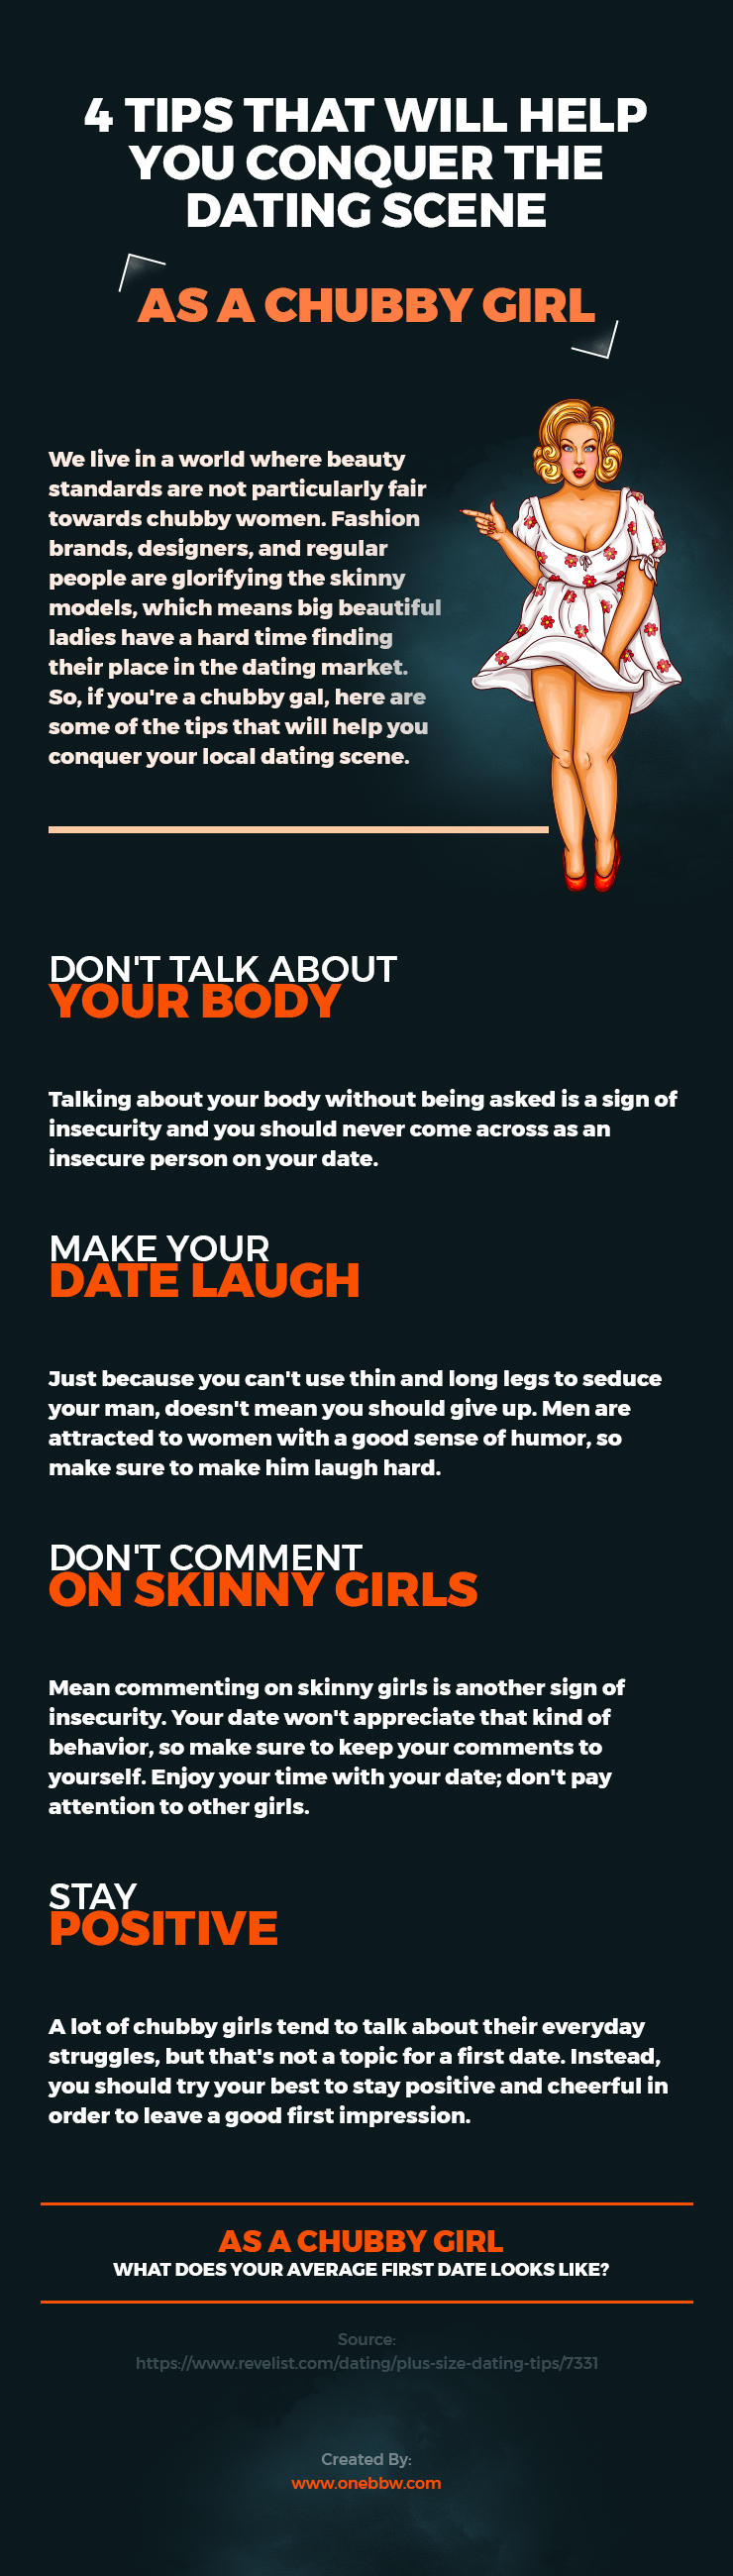 4 Tips That Will Help You Conquer The Dating Scene As A Chubby Girl